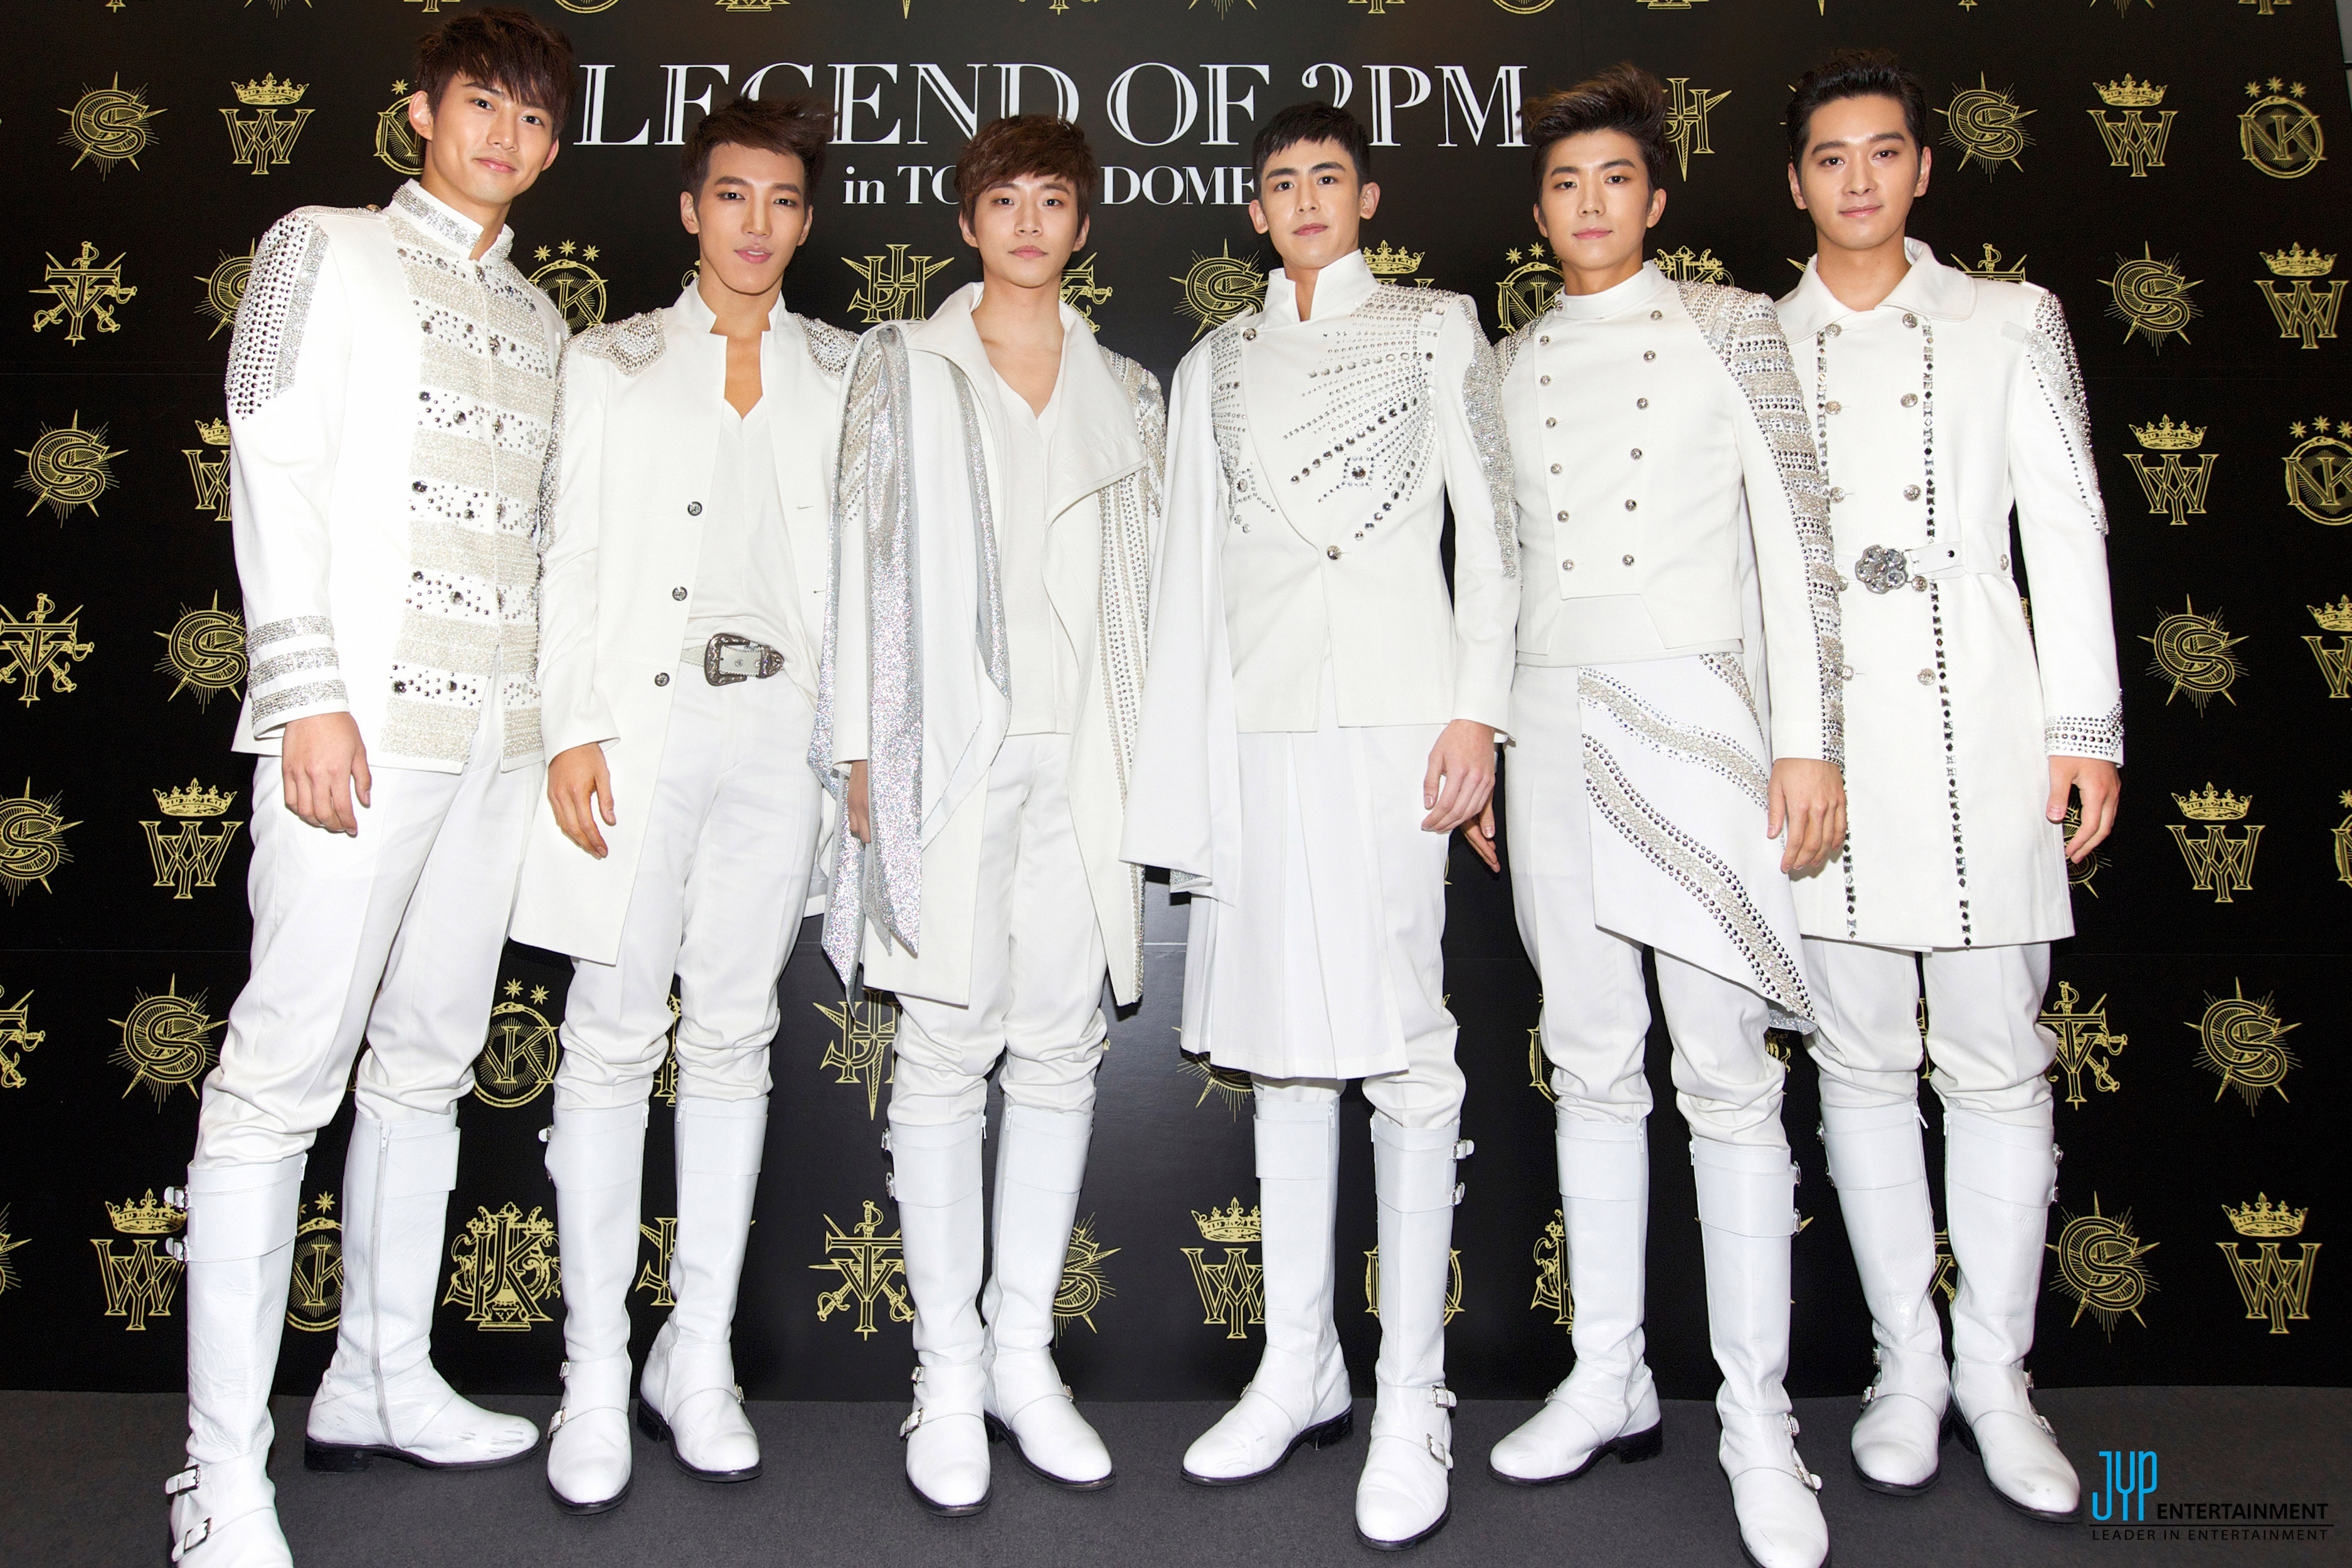 LEGEND OF 2PM in TOKYO DOME(初回生産限定盤) [DVD] rdzdsi3その他